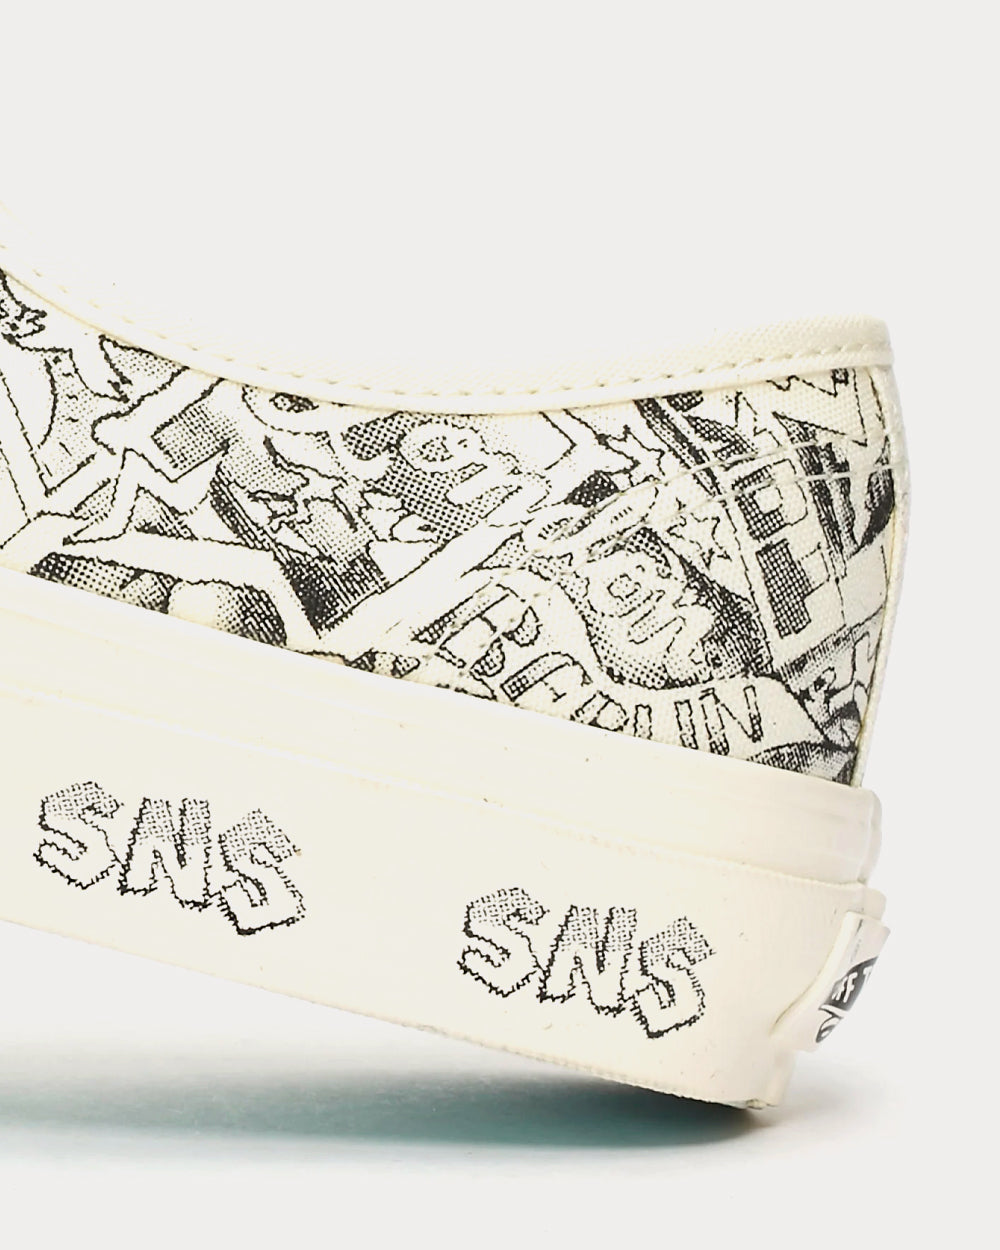 Vans x SNS - OG Authentic LX Marshmallow White Low Top Sneakers